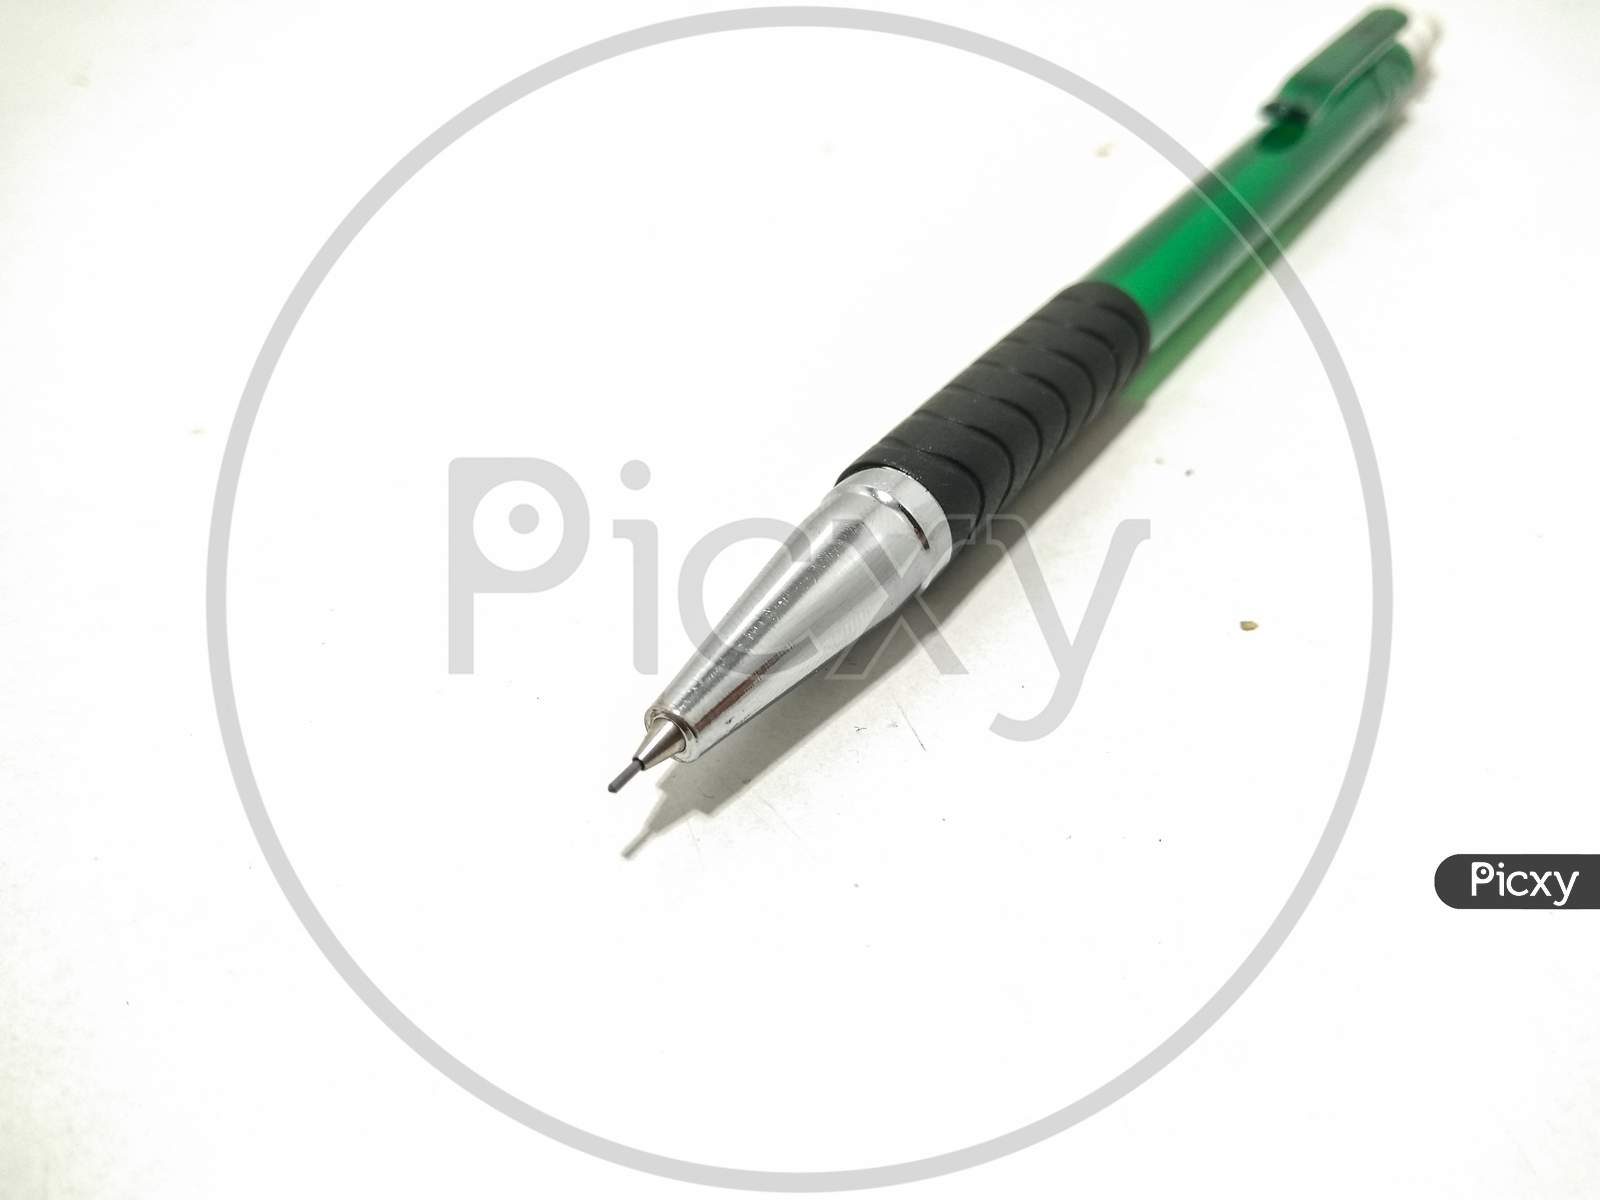 A picture of ink pen